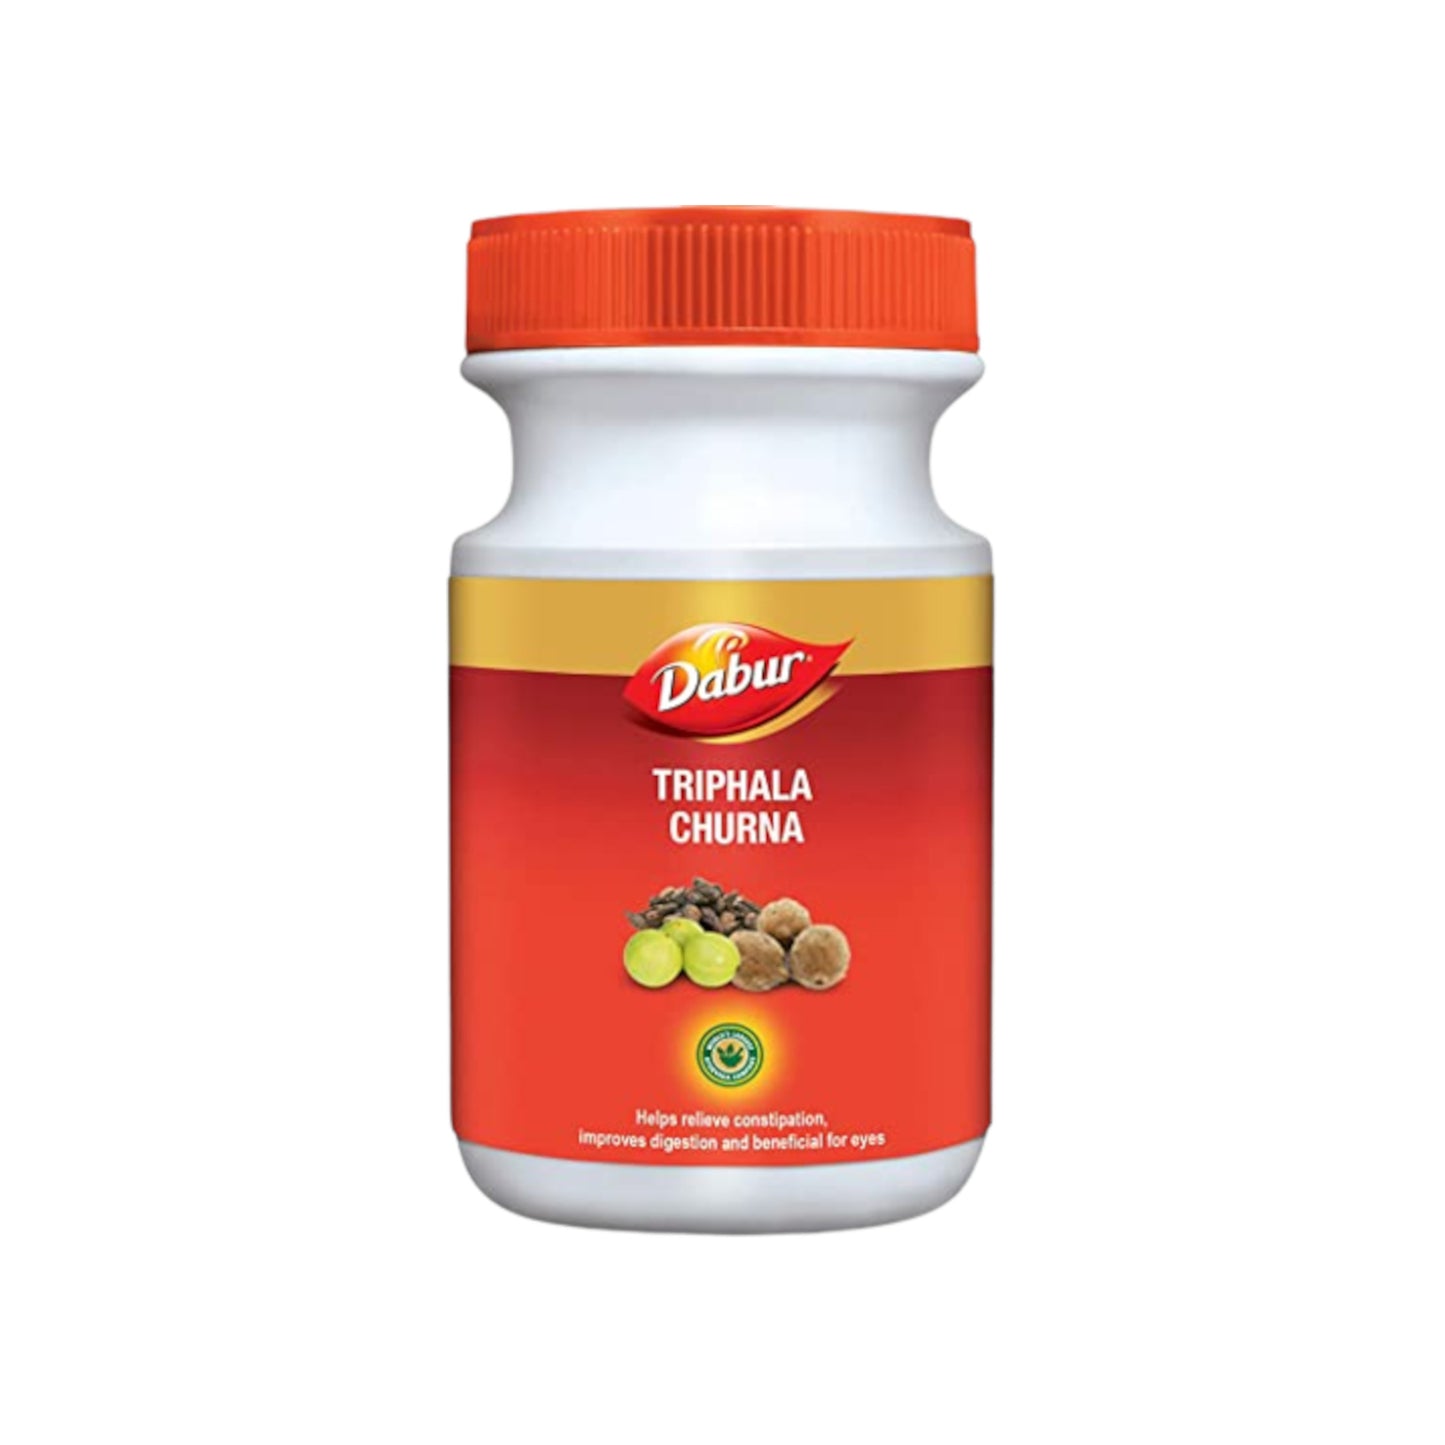 Image for Dabur Triphala Churna Powder - 120g. A gentle and effective herbal laxative for deep cleansing, detoxification, and digestive harmony..